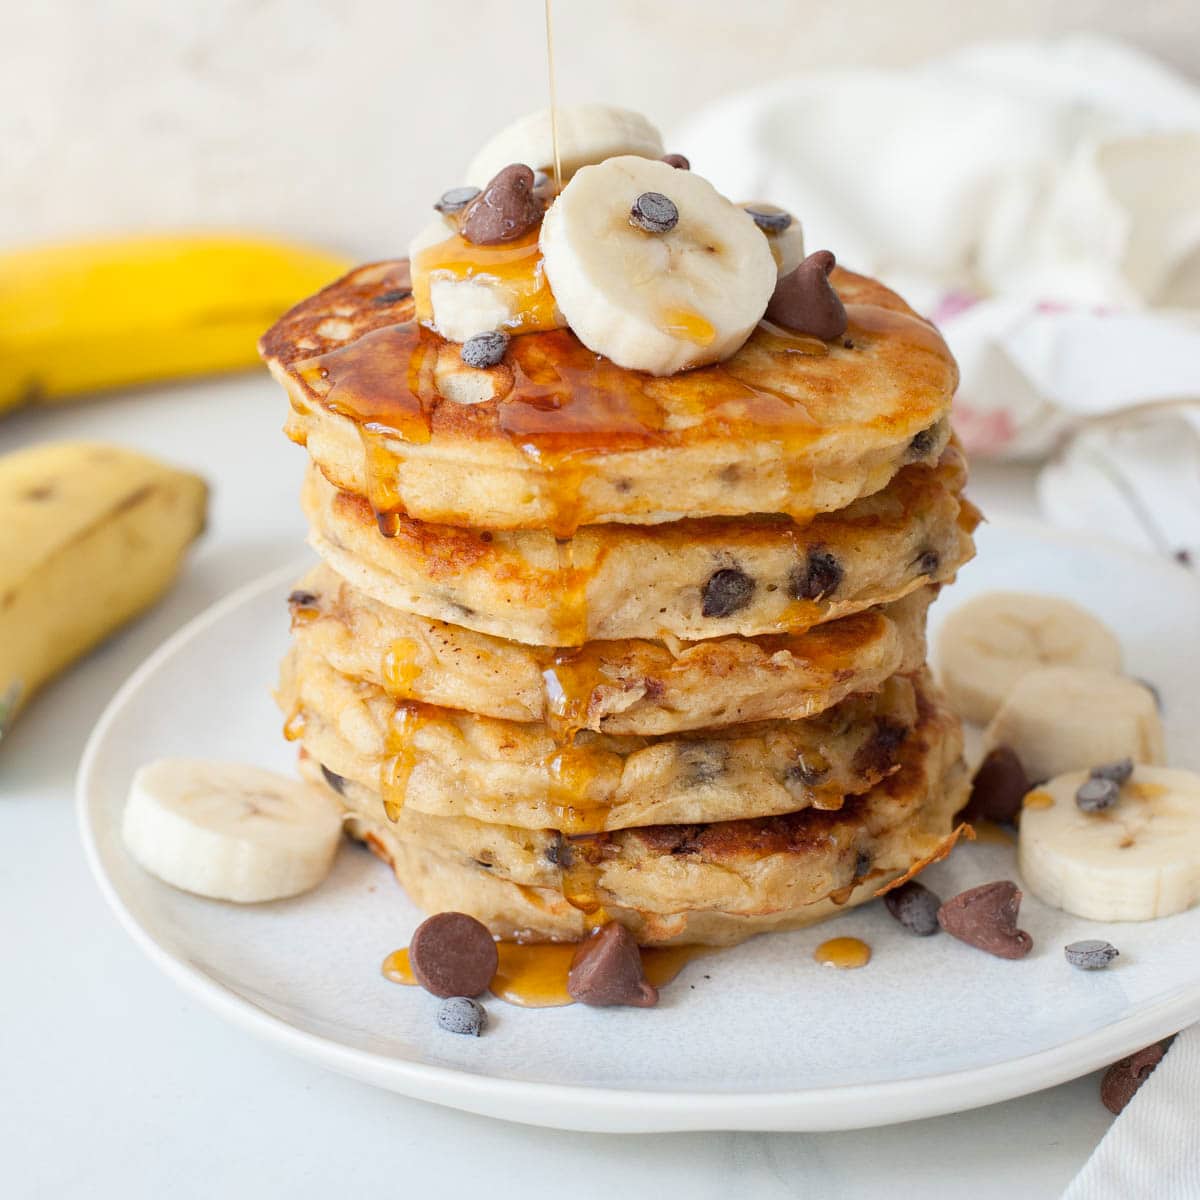 Banana chocolate chip pancakes on a white plate.